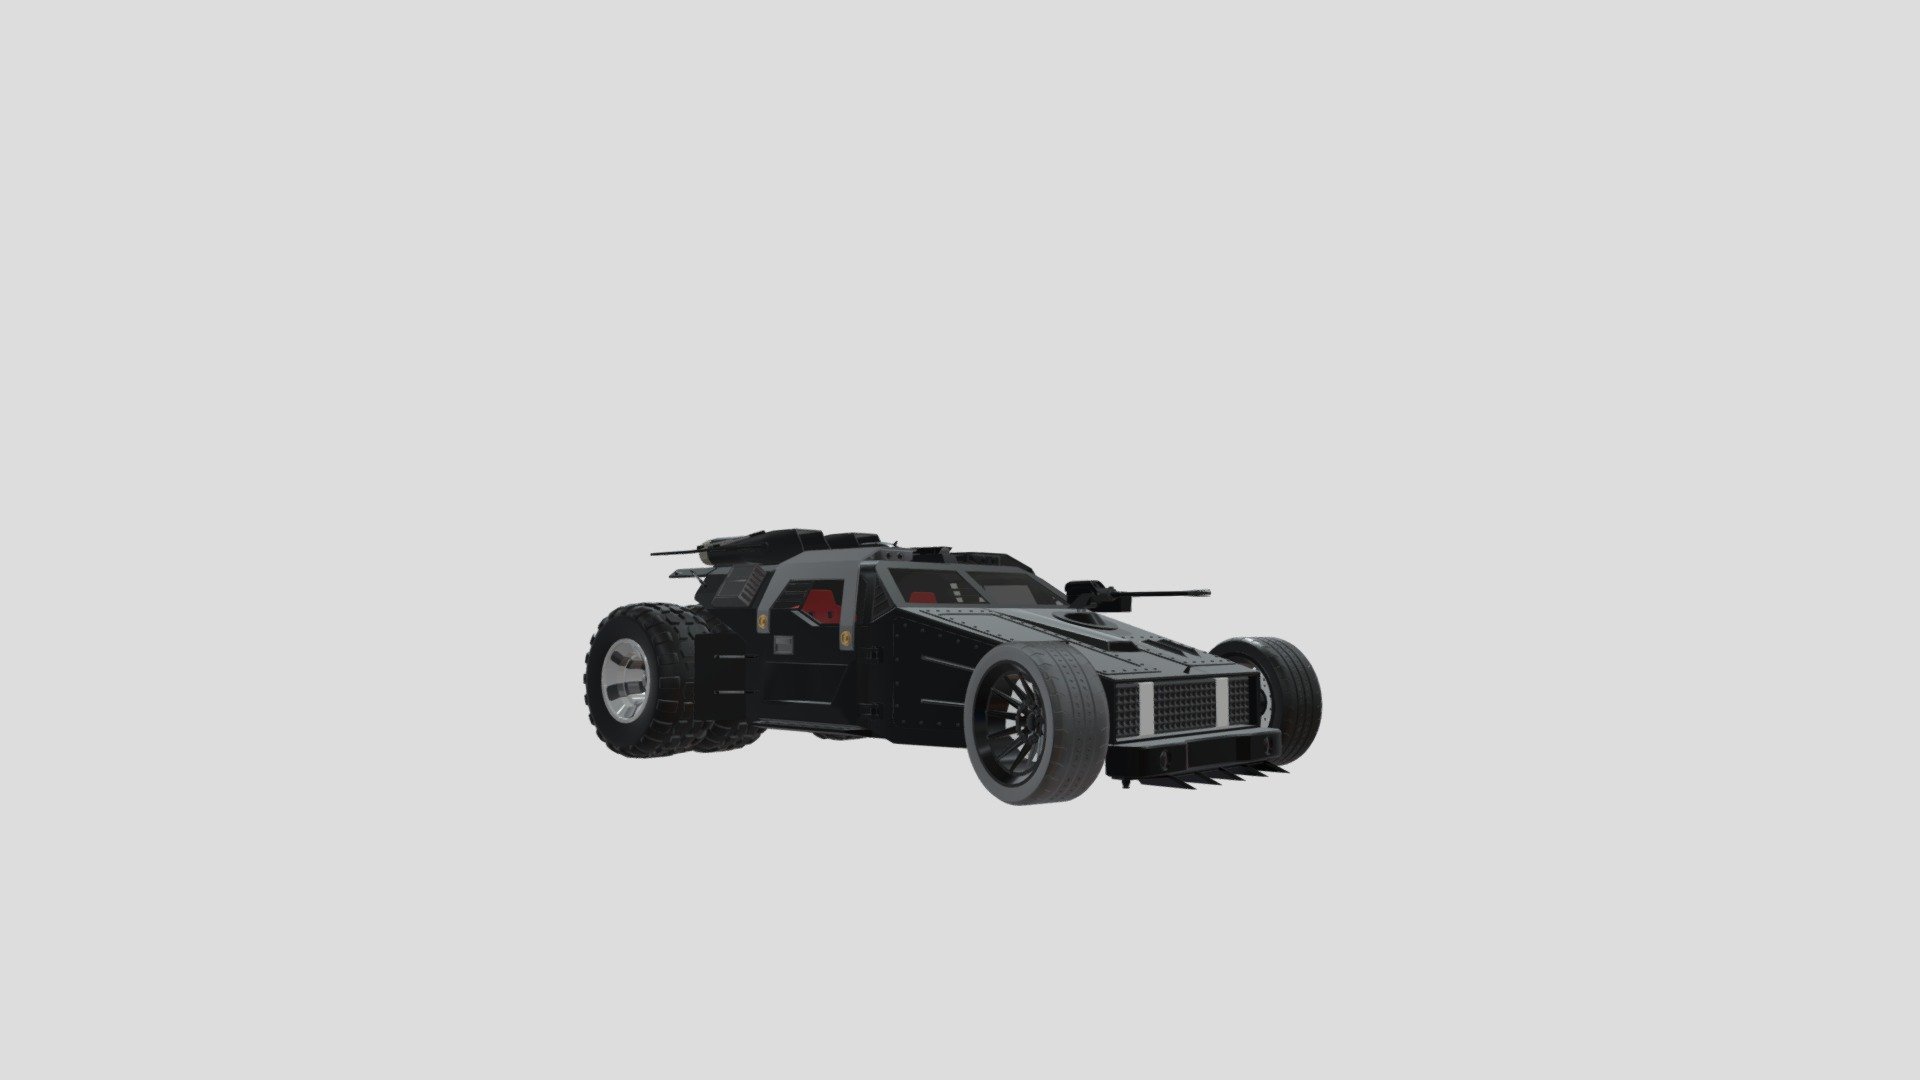 The Batmobile concept by me. There is an interior. Mdium Poly, so resdy for game or animation (no Rig). no UV Maps 3d model